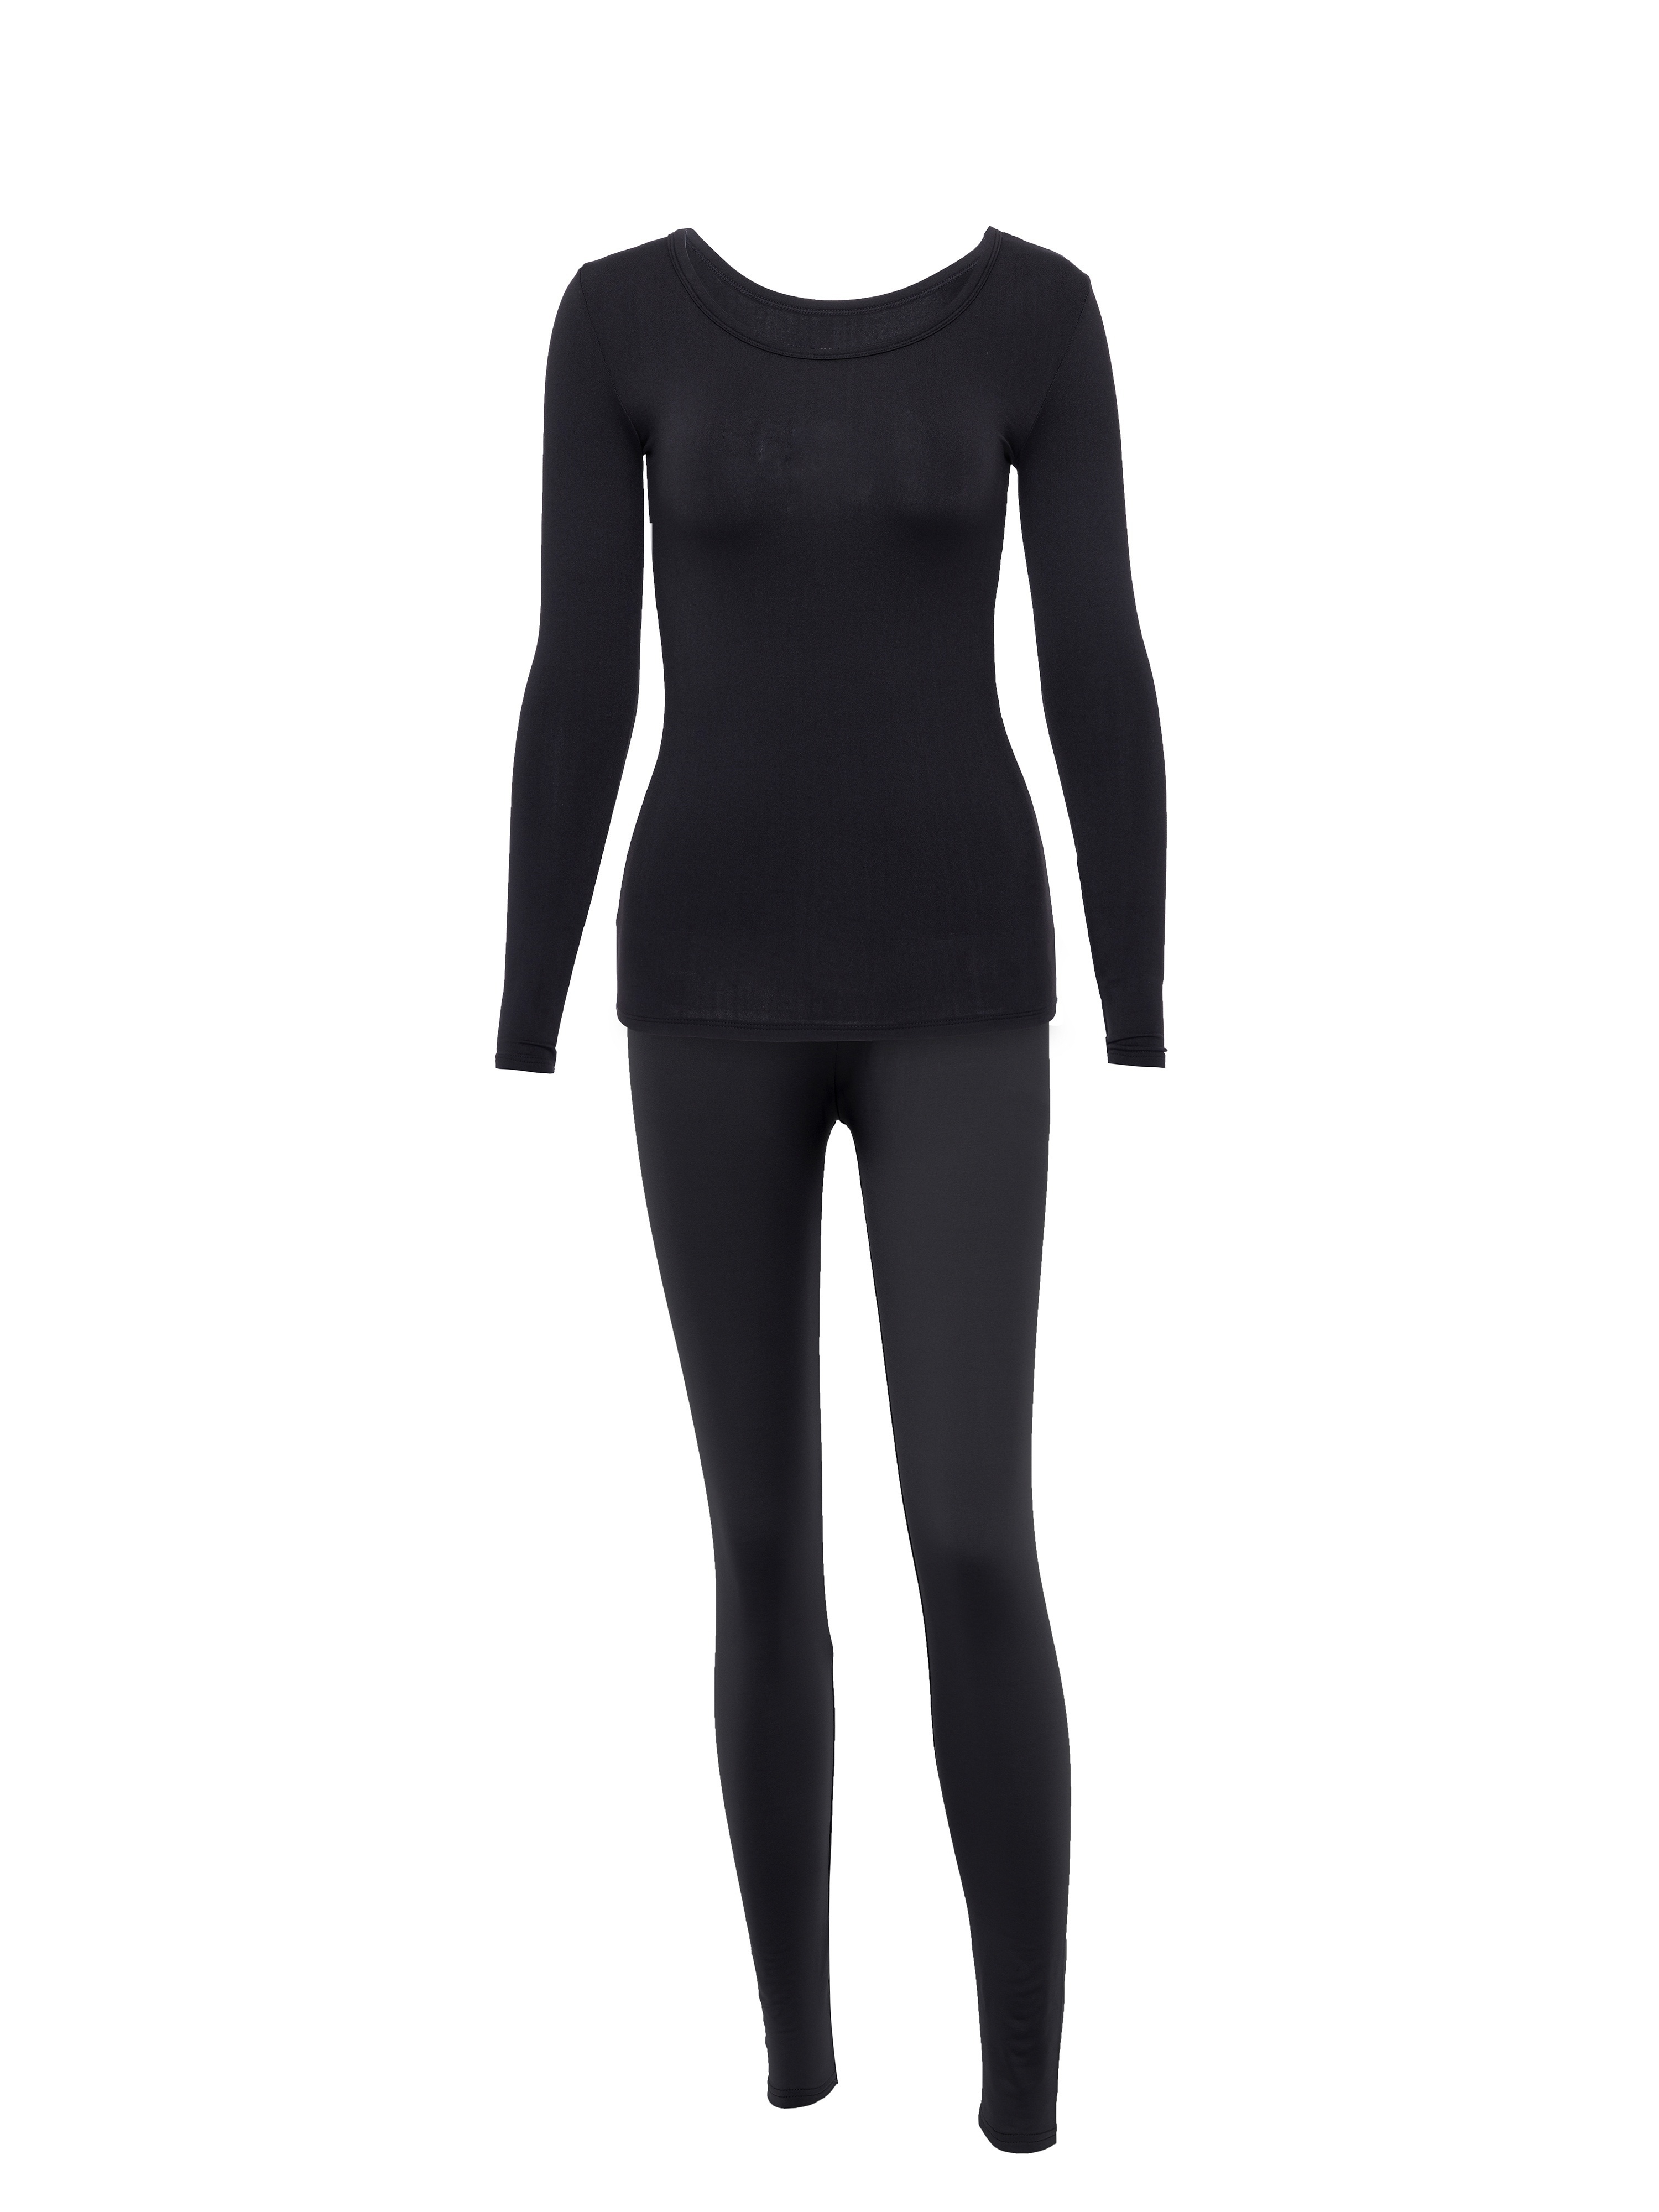 Plus Size Simple Thermal Underwear Set, Women's Plus Thickened